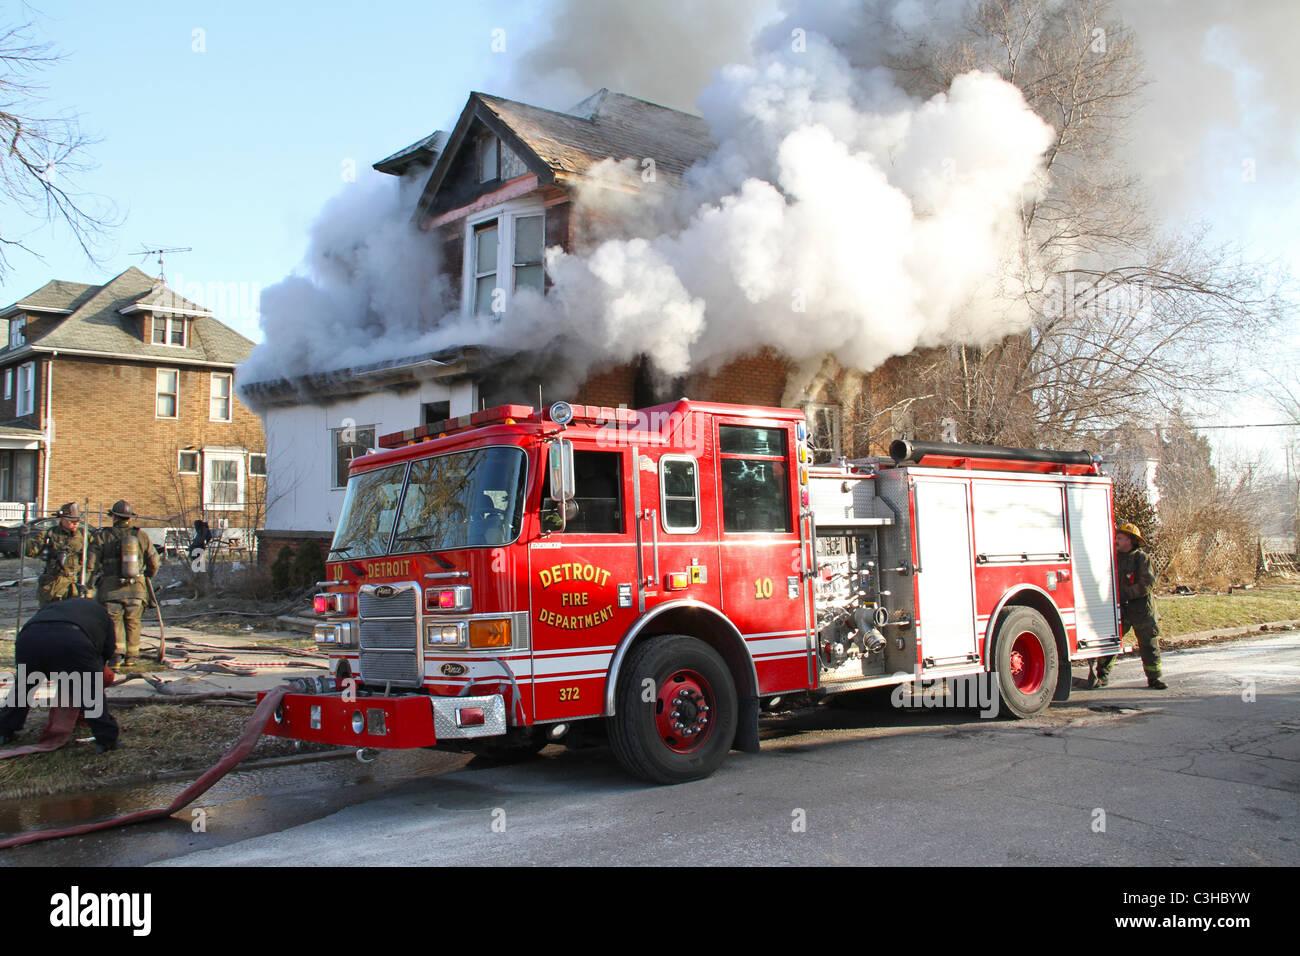 Detroit Fire Department at scene of house fire Detroit Michigan USA Stock Photo